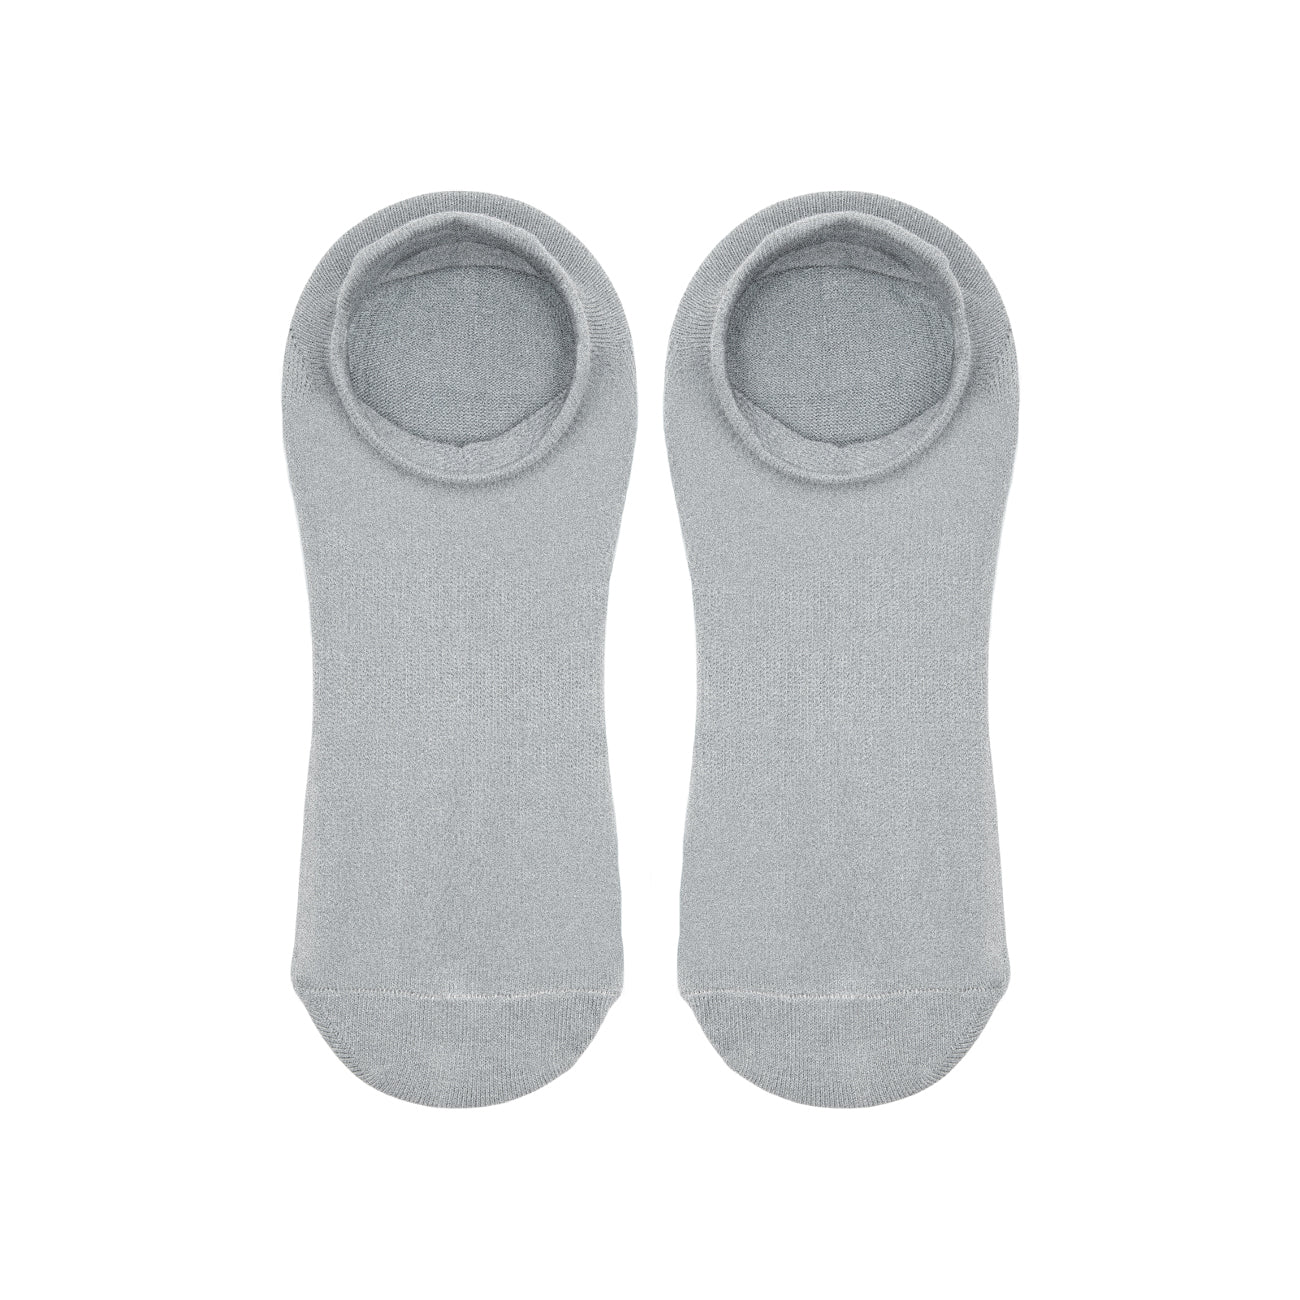 Cotton Ankle Length Socks with Heel Tab - IDENTITY Apparel Shop